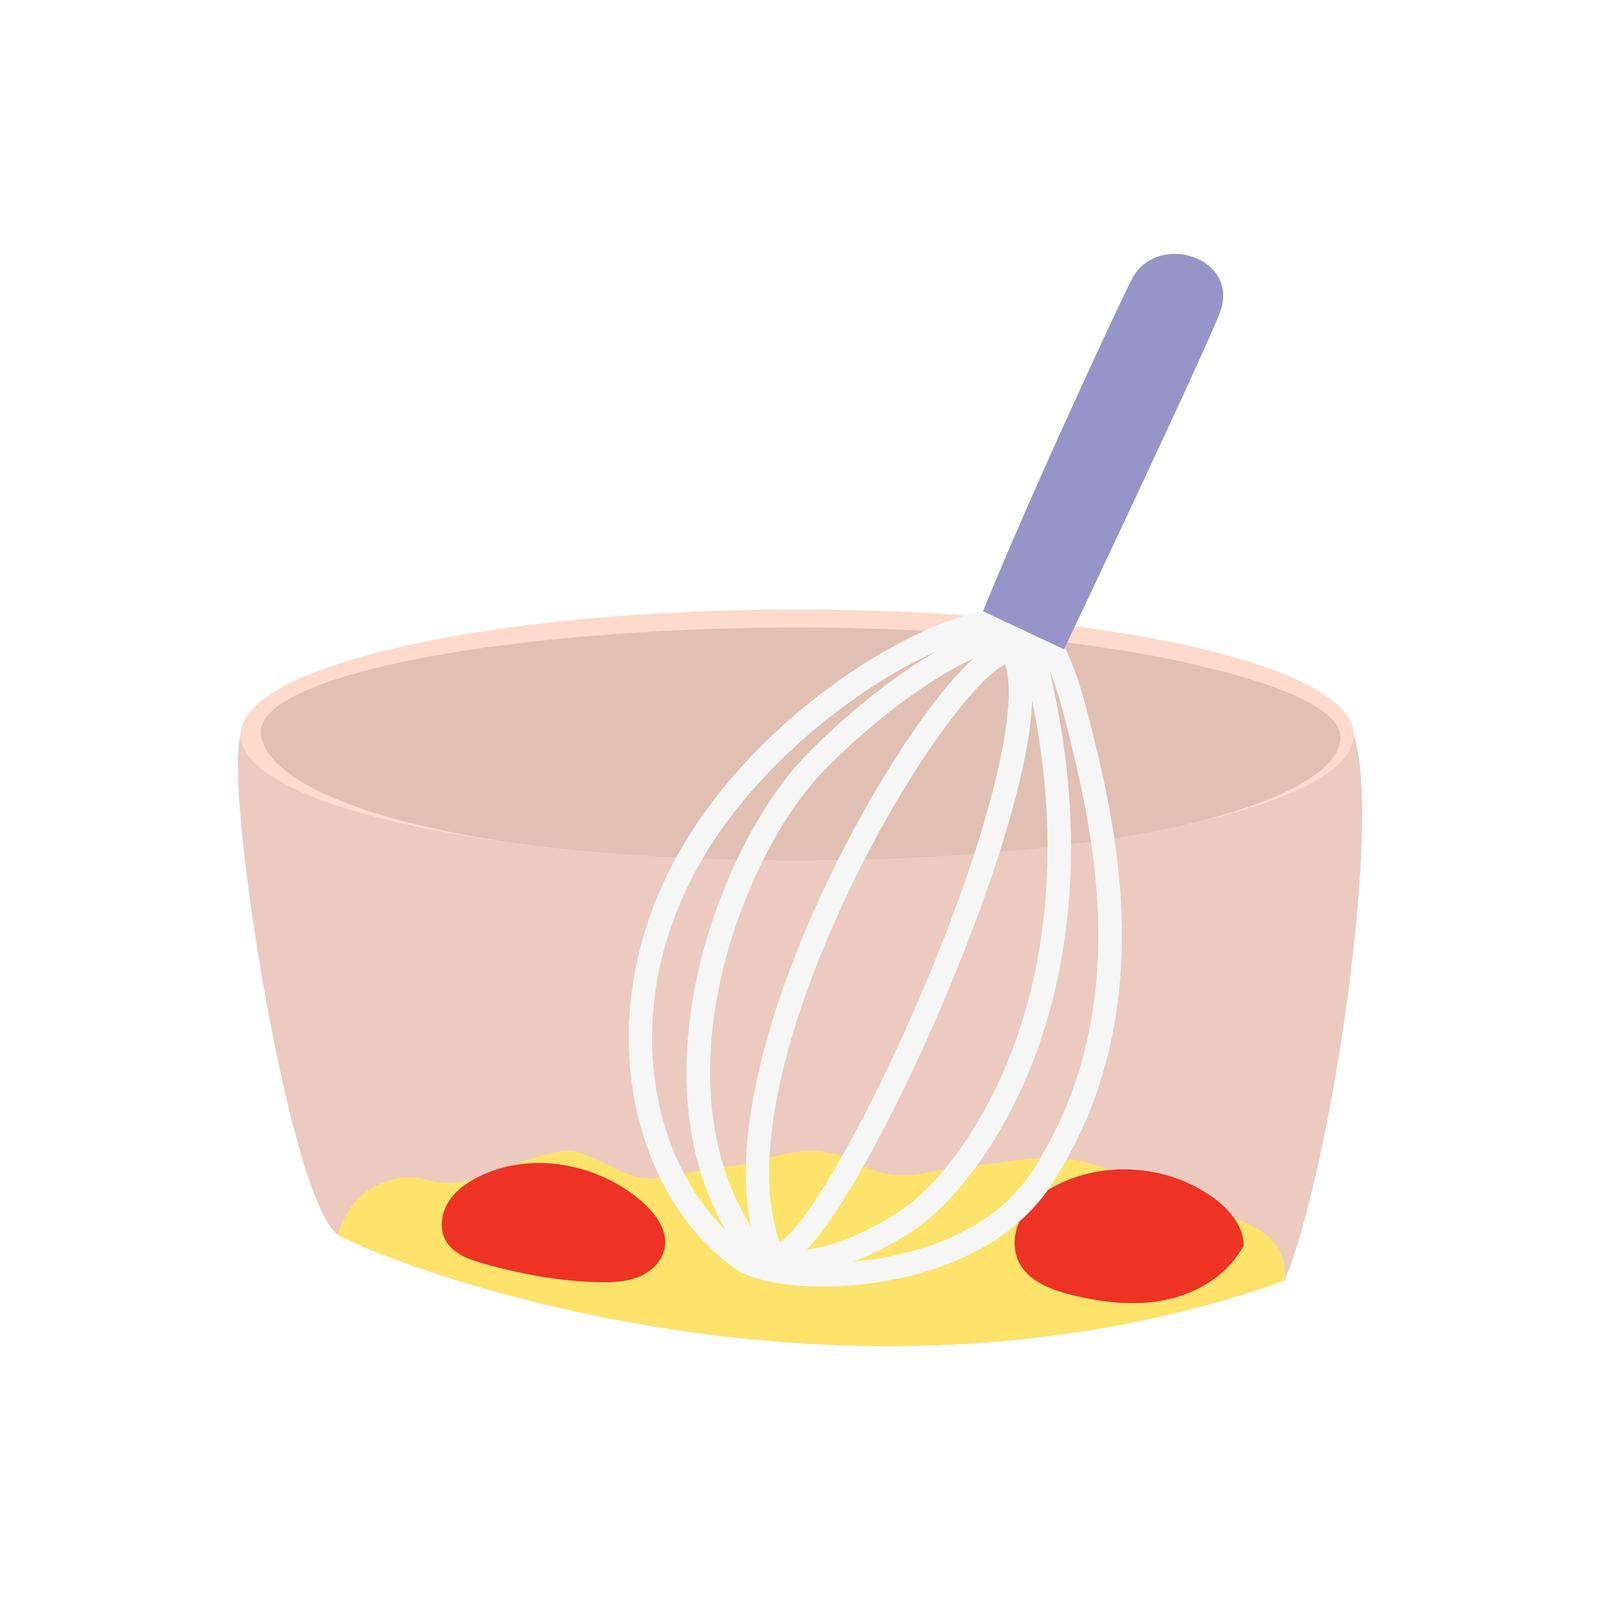 Whiskers for mixing and stirring eggs or dough, illustration in flat design